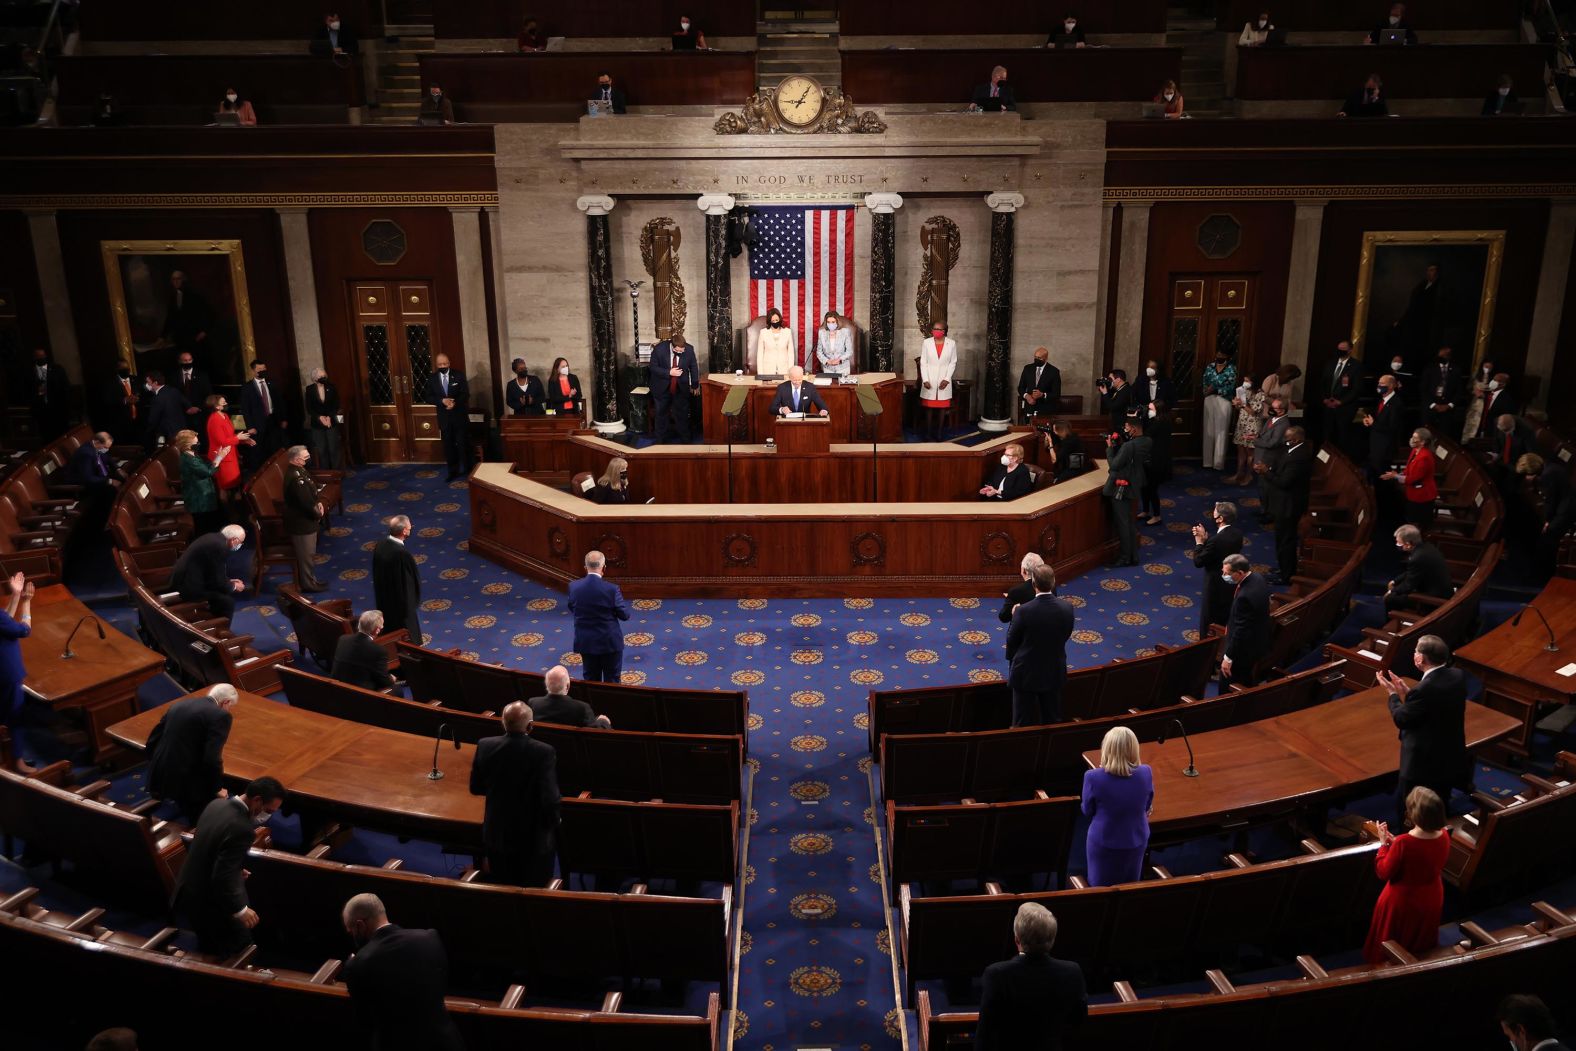 About 200 people were allowed in the House chamber for the President's remarks.